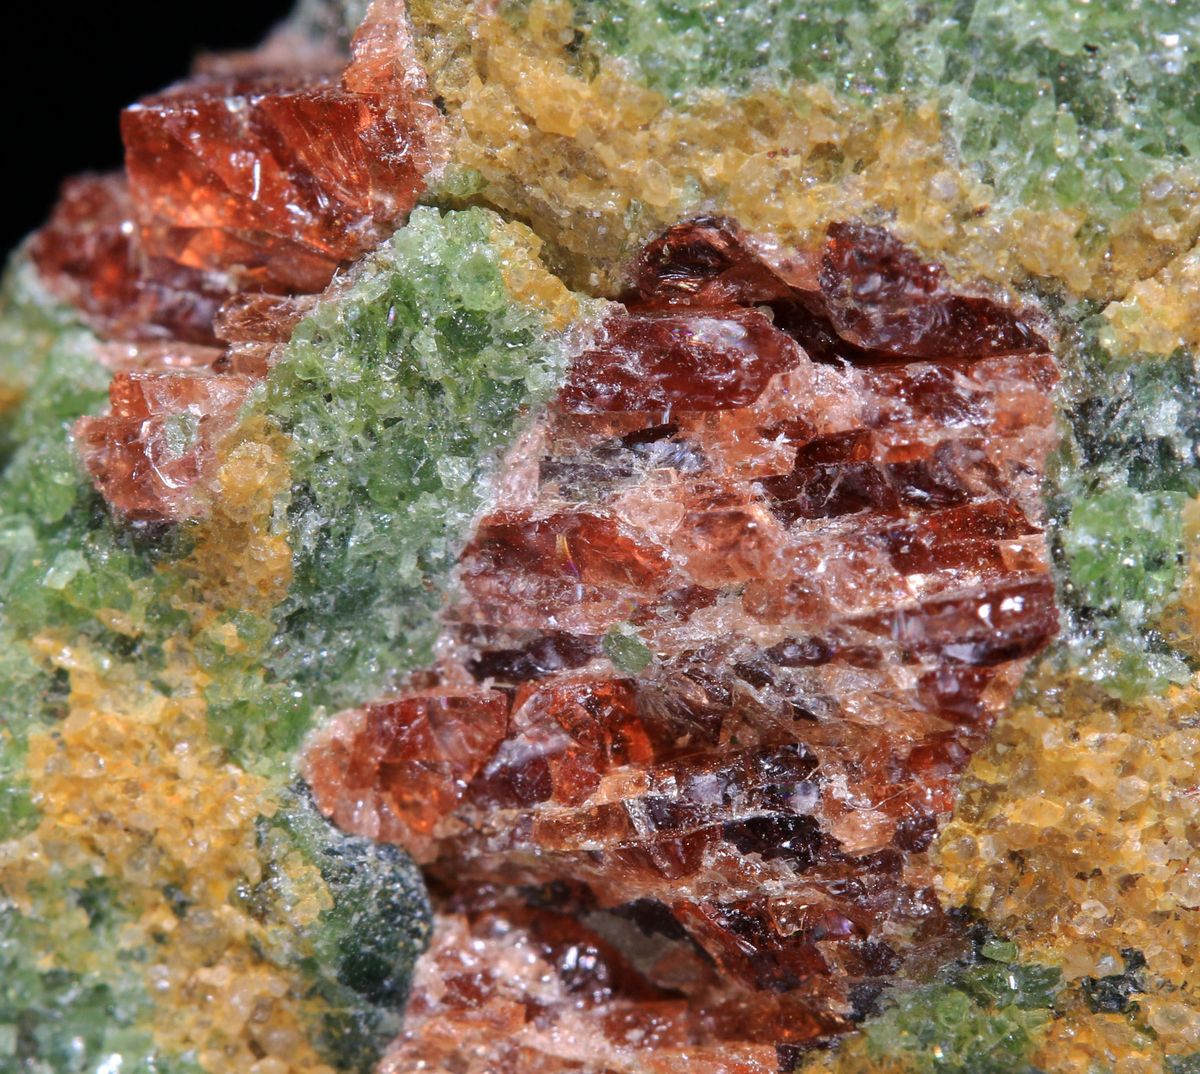 Pyrope Chromian Diopside & Forsterite